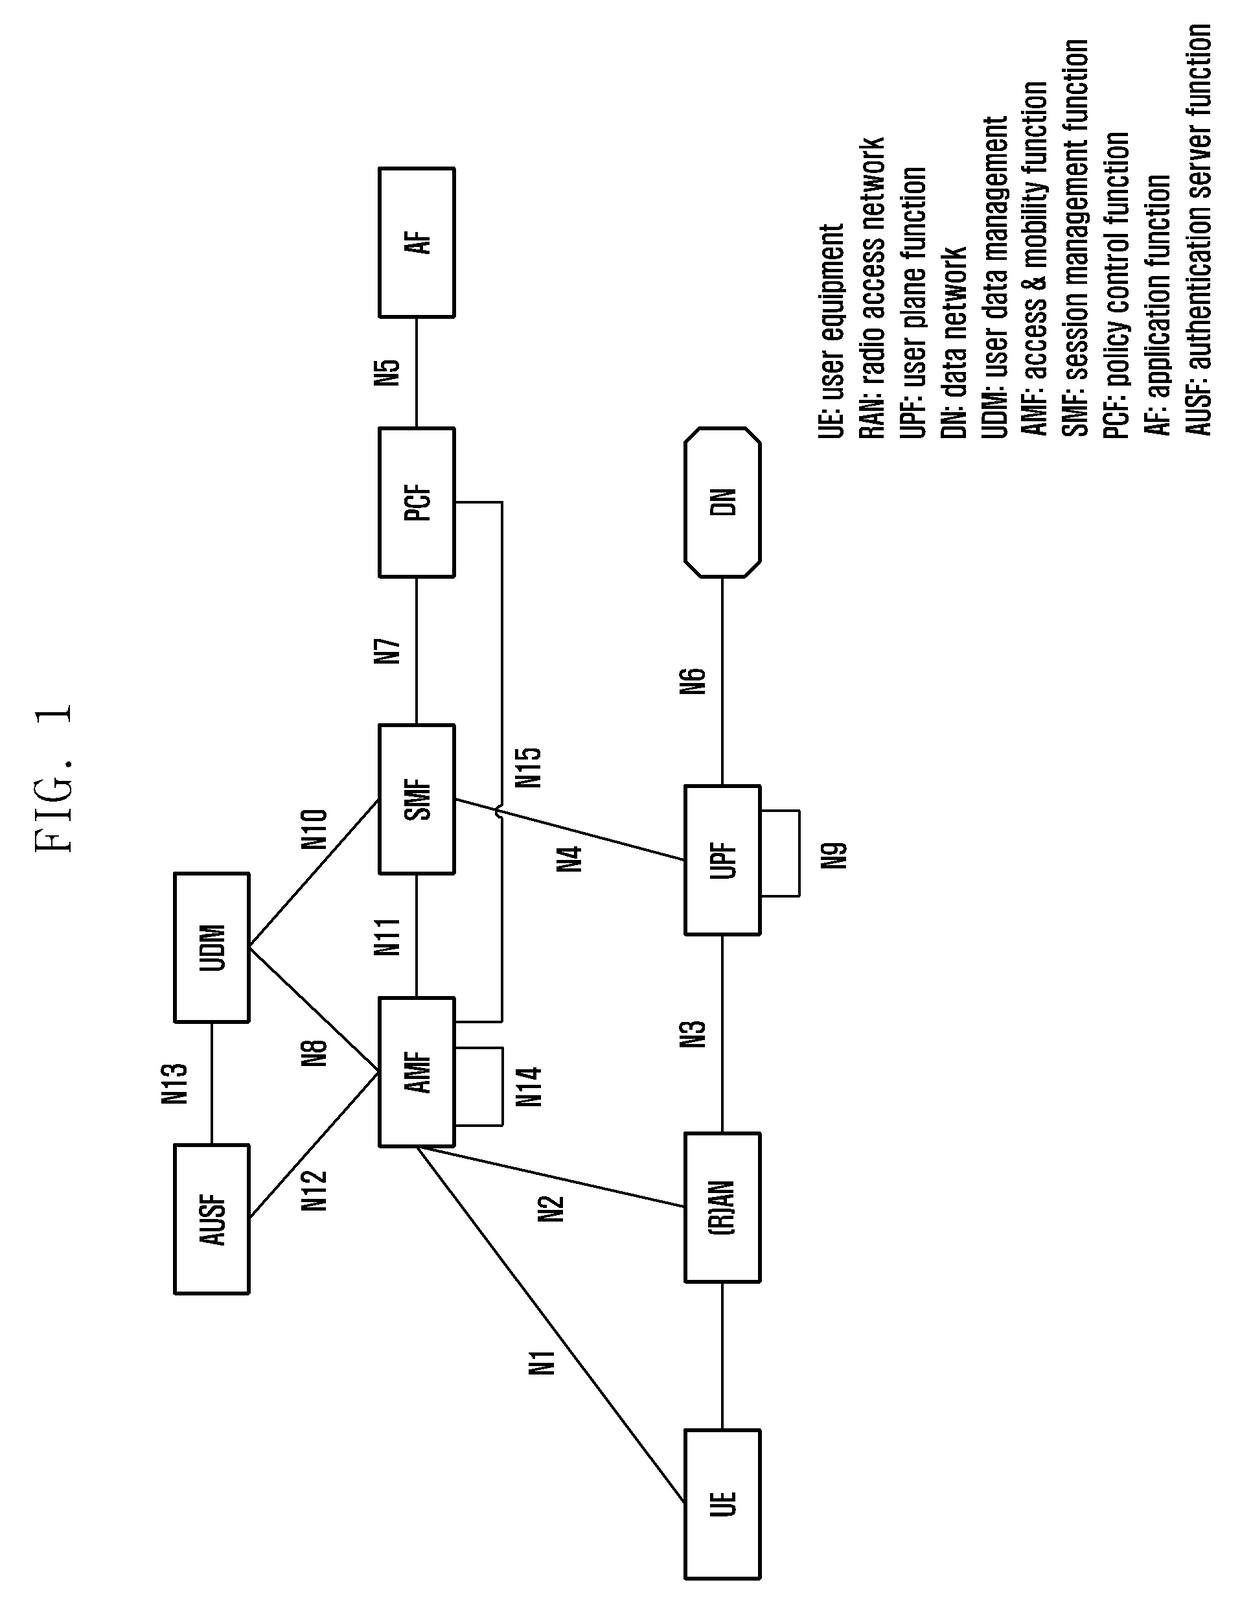 Method of processing anchor user plane function (UPF) for local offloading in 5g cellular network